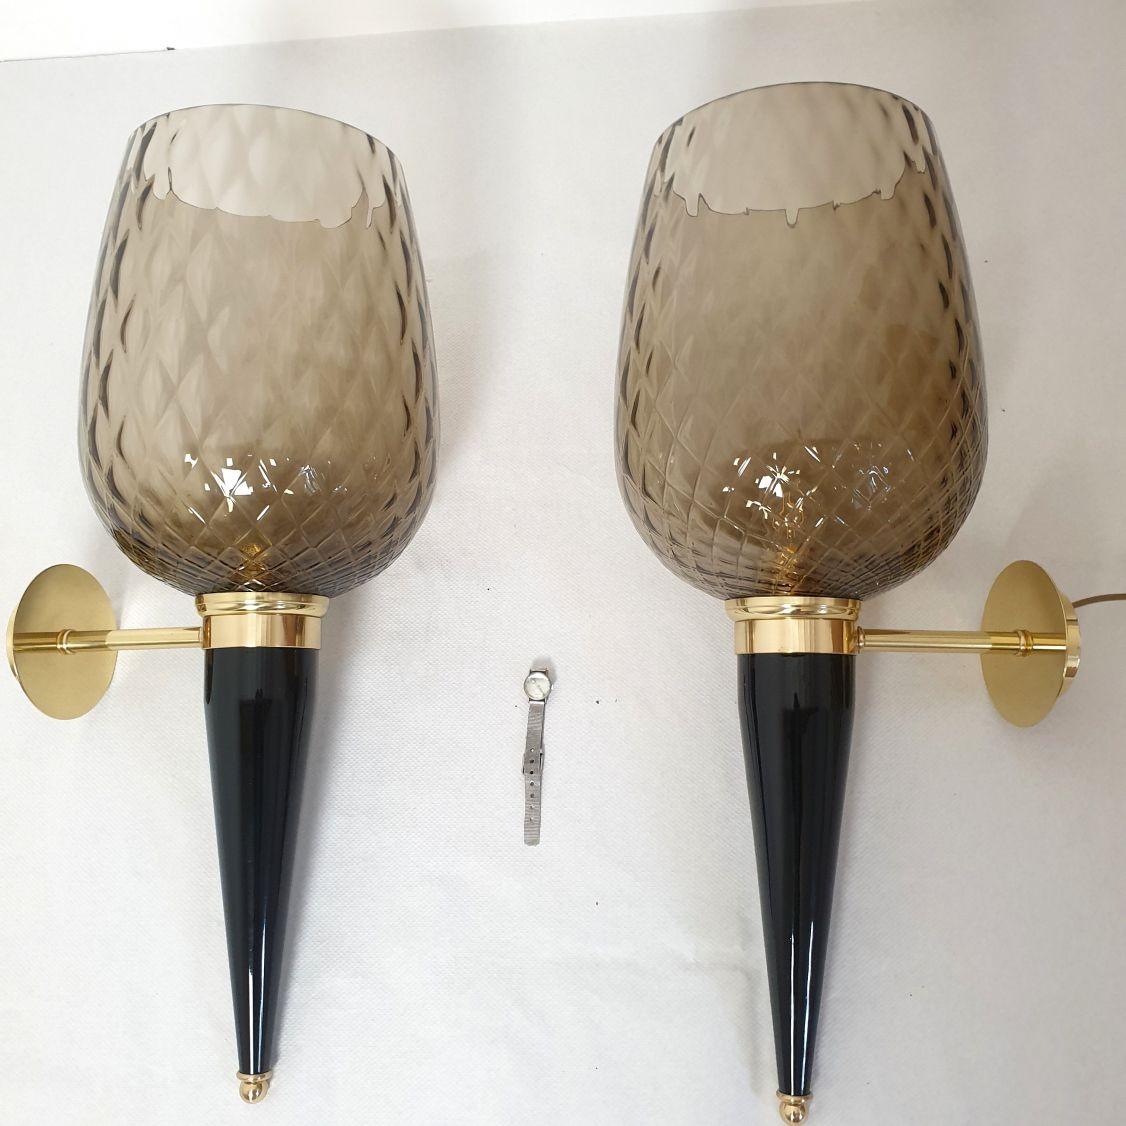 Pair of extra large Murano glass sconces, attributed to Mila Schon, Italy 1970s.
Set of six or three pairs available. Sold and priced by pair.
The Mid-Century Modern sconces are made of a translucent light brown extra large vase, nesting the